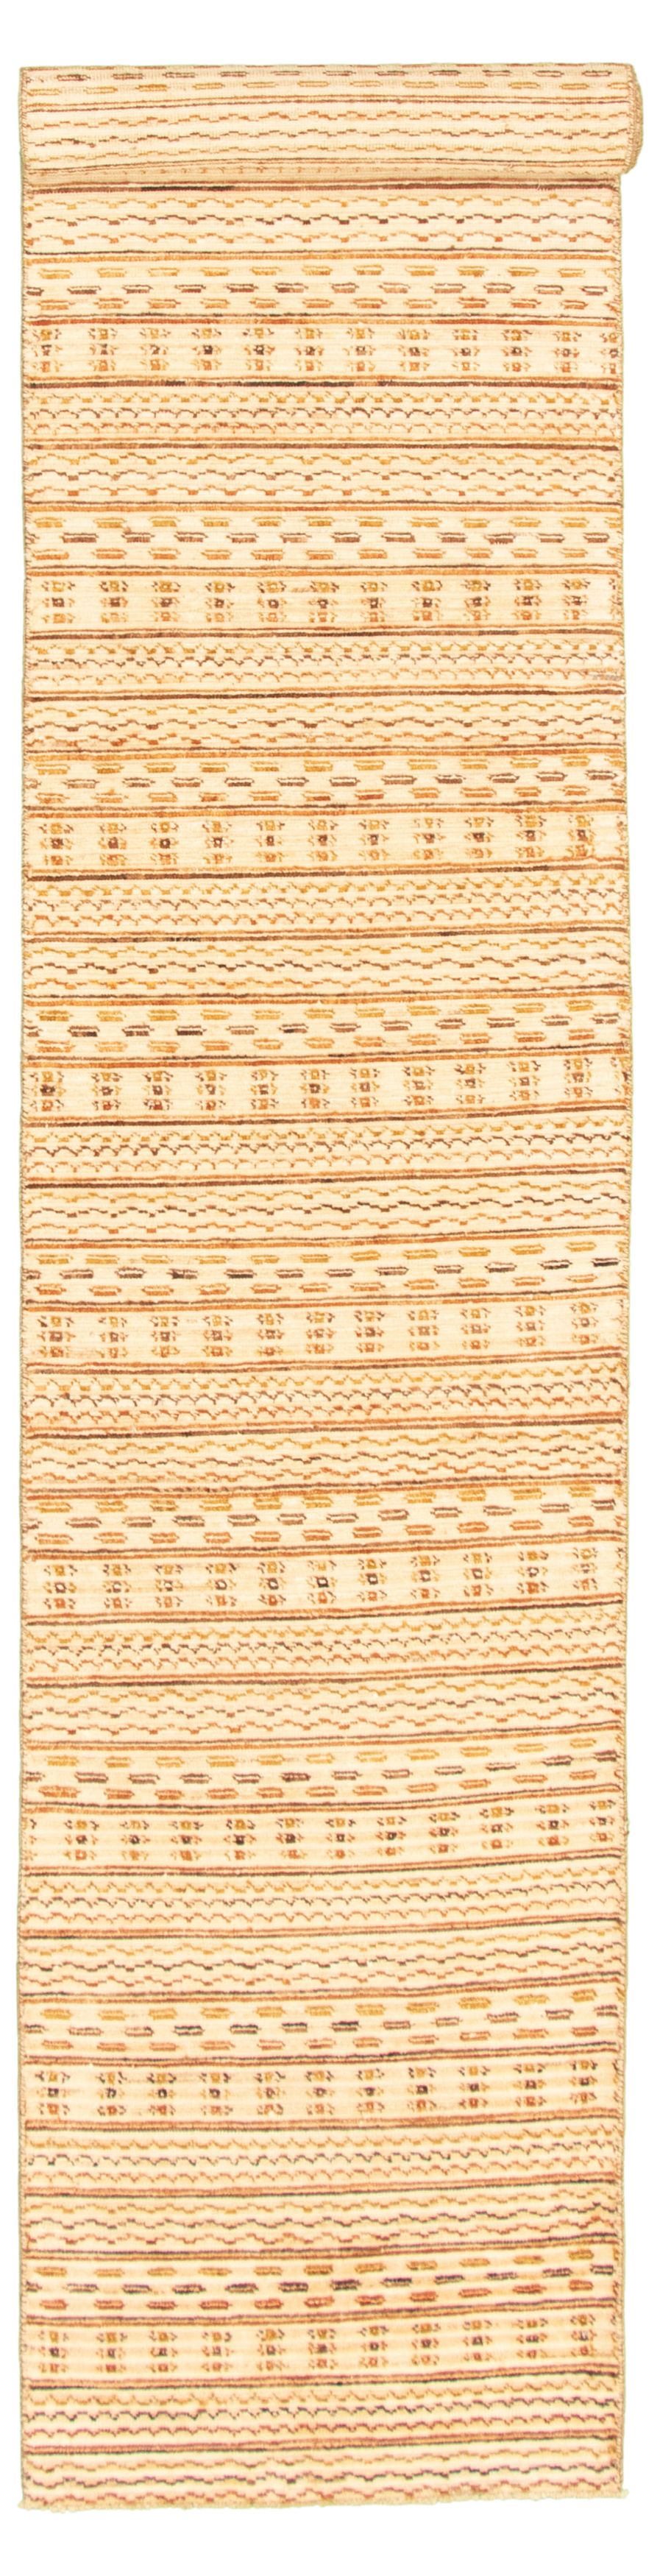 Hand-knotted Peshawar Ziegler Ivory, Light Brown Wool Rug 2'5" x 14'9" Size: 2'5" x 14'9"  